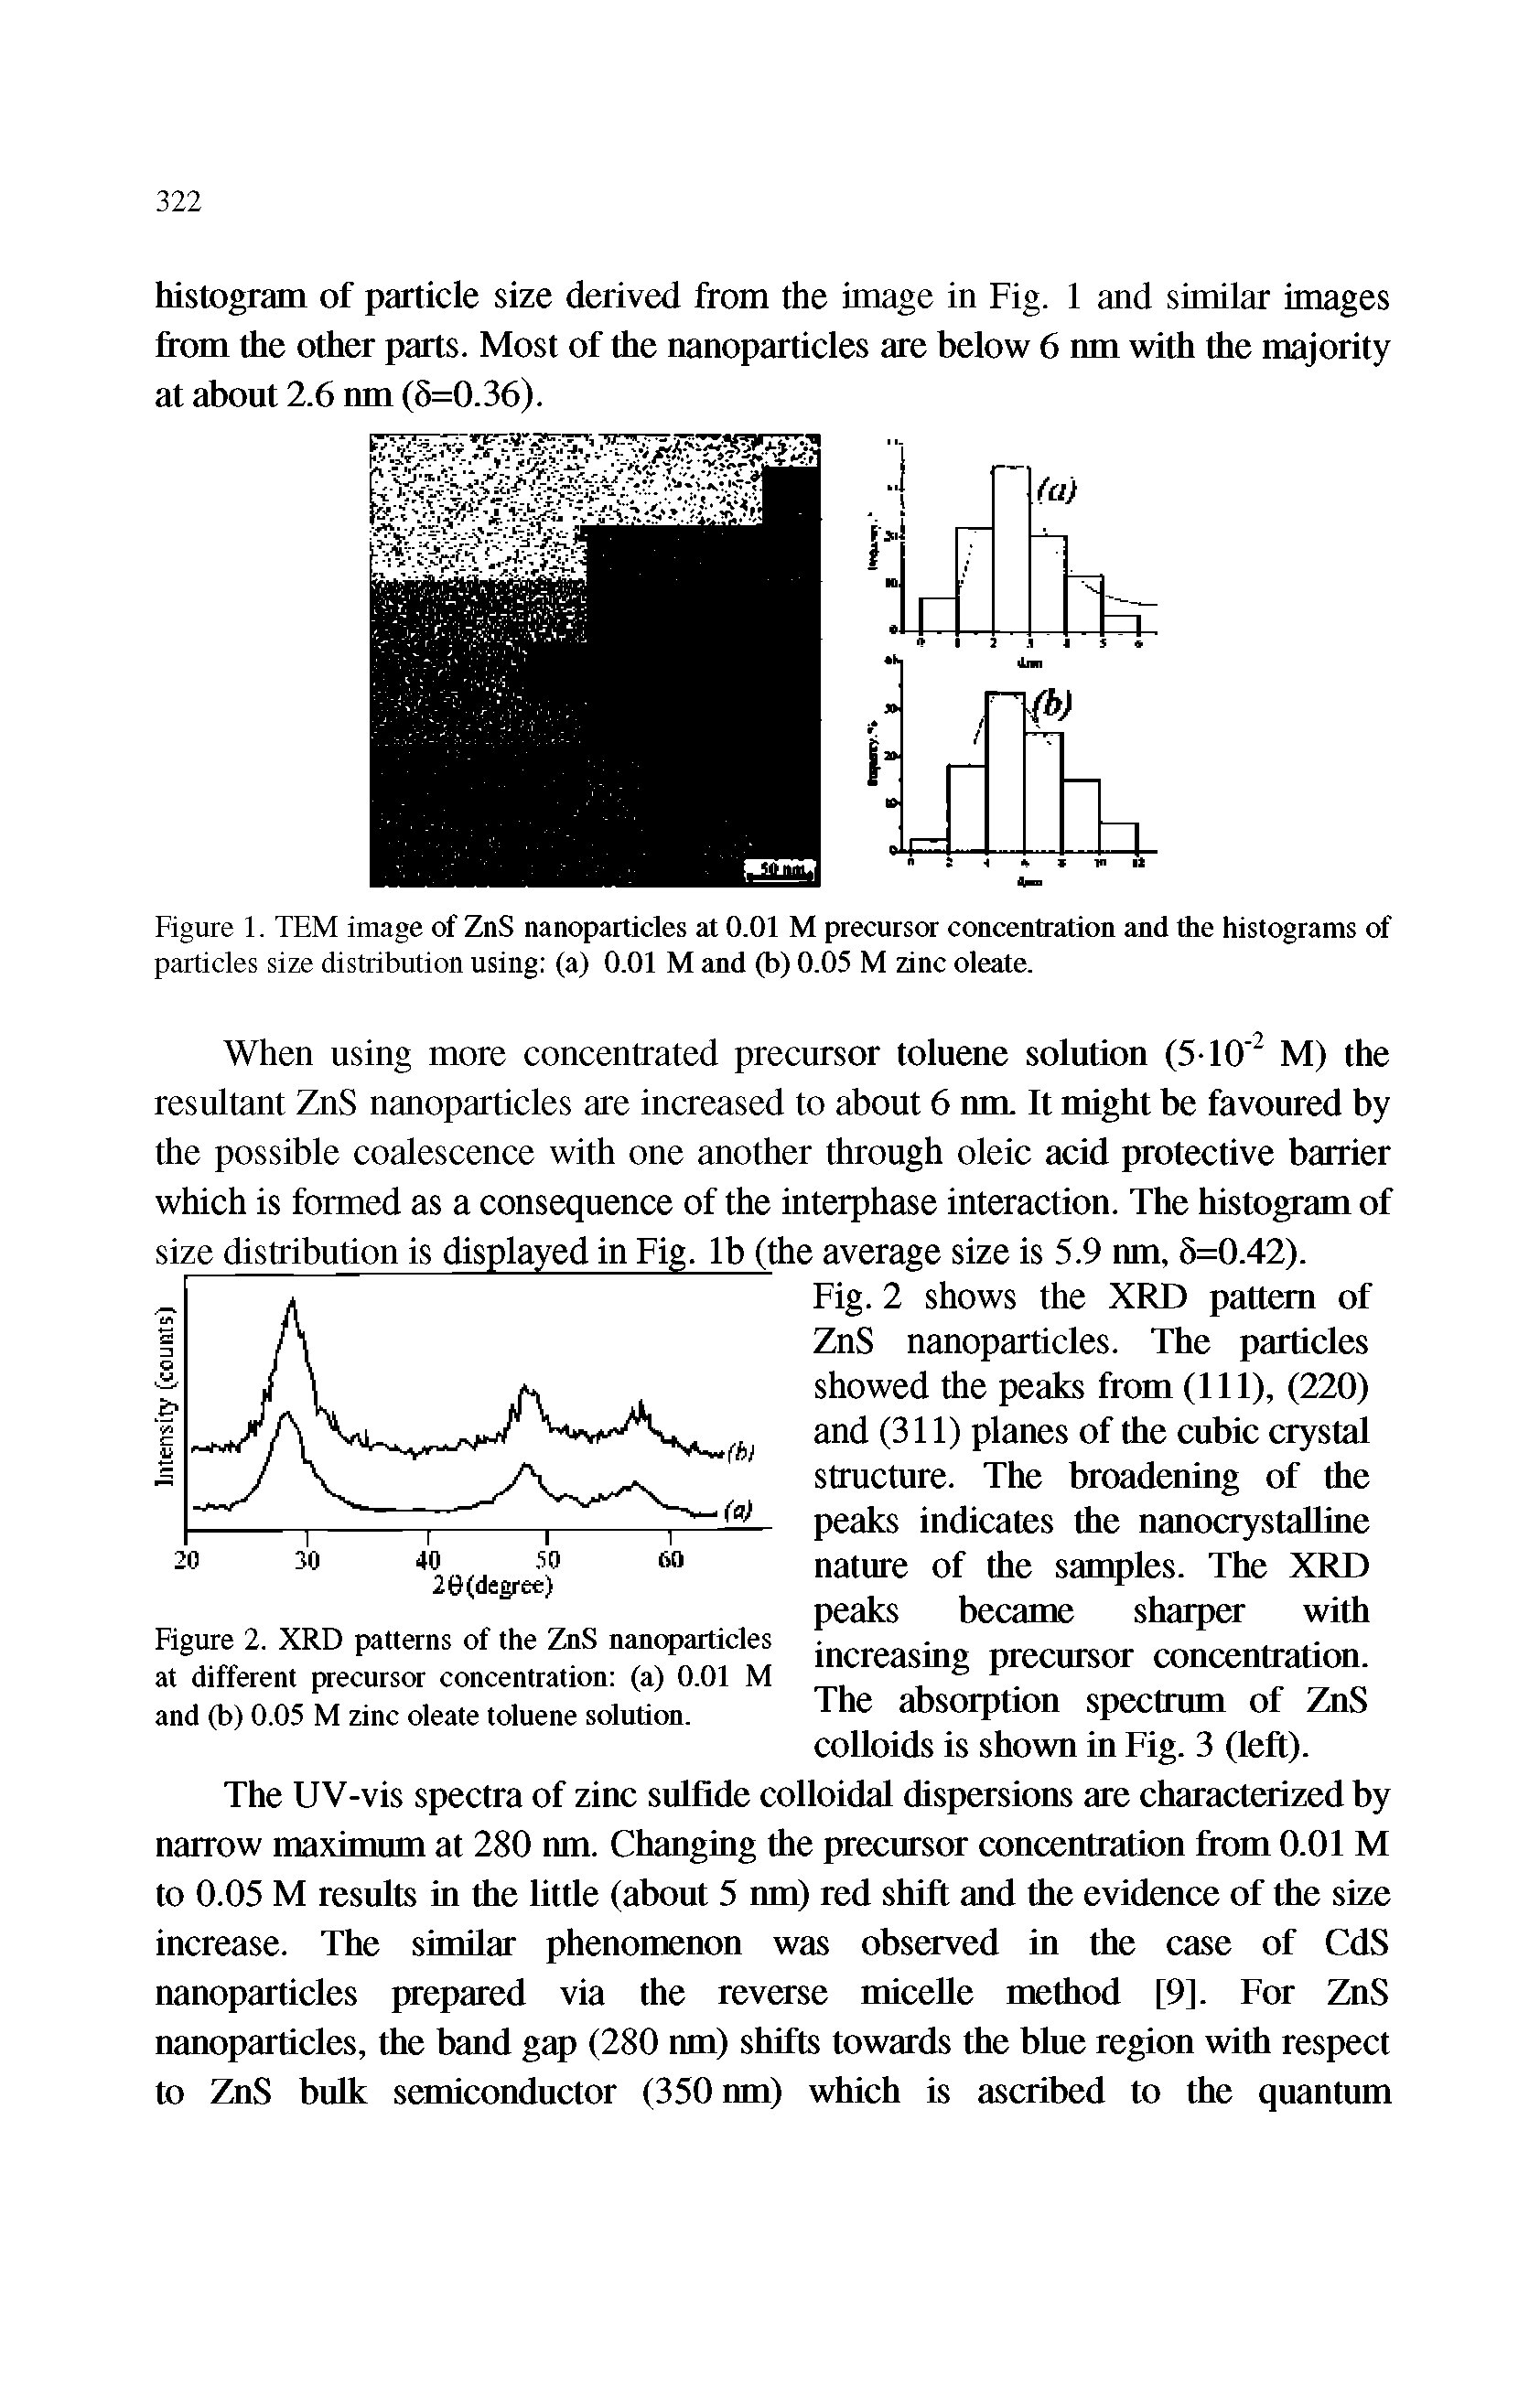 Figure 1. TEM image of ZnS nanoparticles at 0.01 M precursor concentration and the histograms of particles size distribution using (a) 0.01 M and (b) 0.05 M zinc oleate.